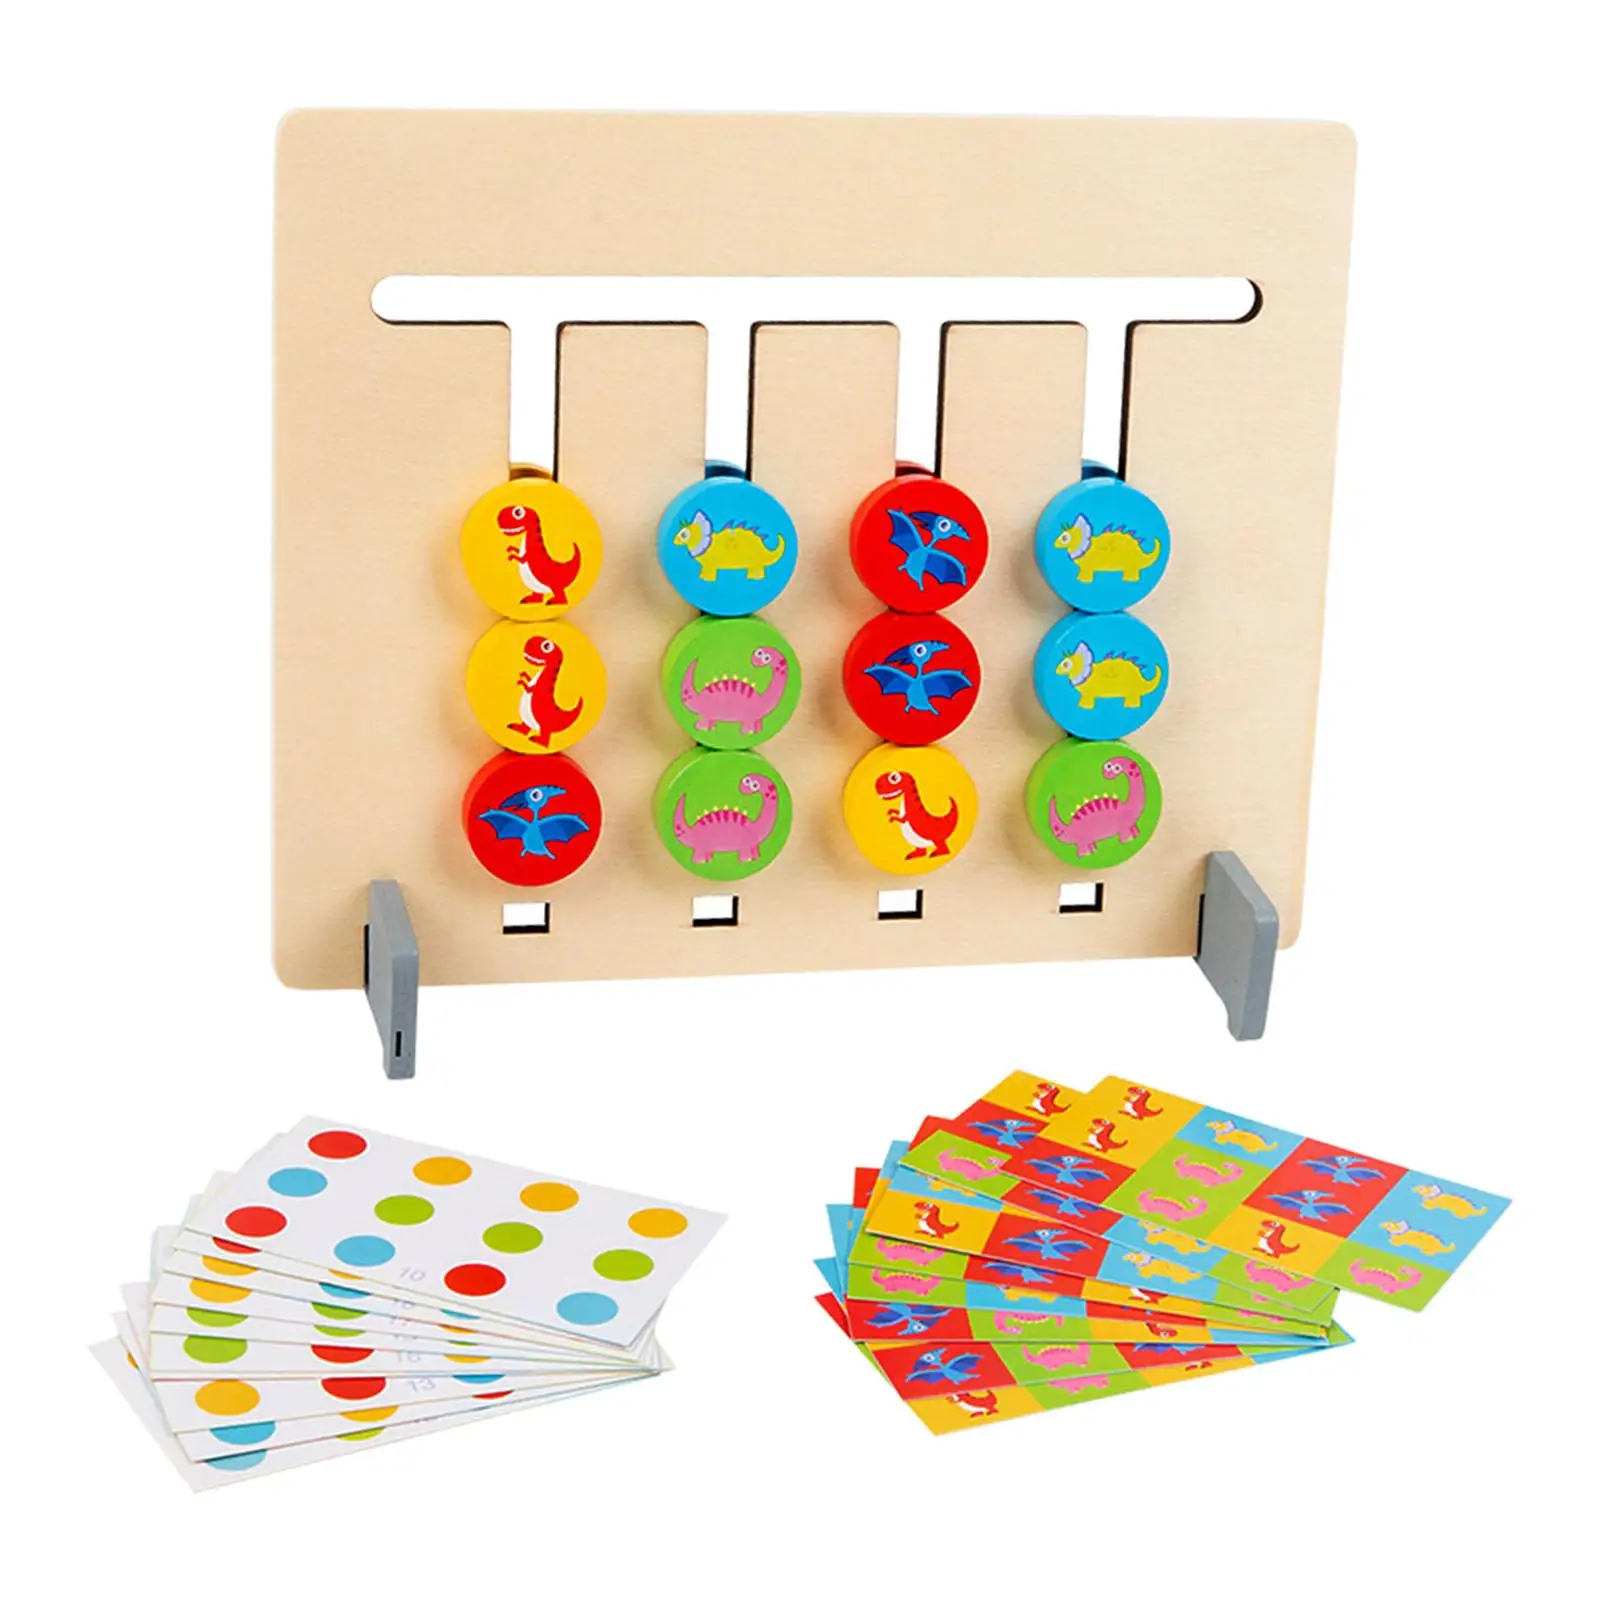 Slide Puzzle Toy Game Developing Educational Shape Color Sorting Matching Game Wooden Board Game for Toddlers Preschool Kids